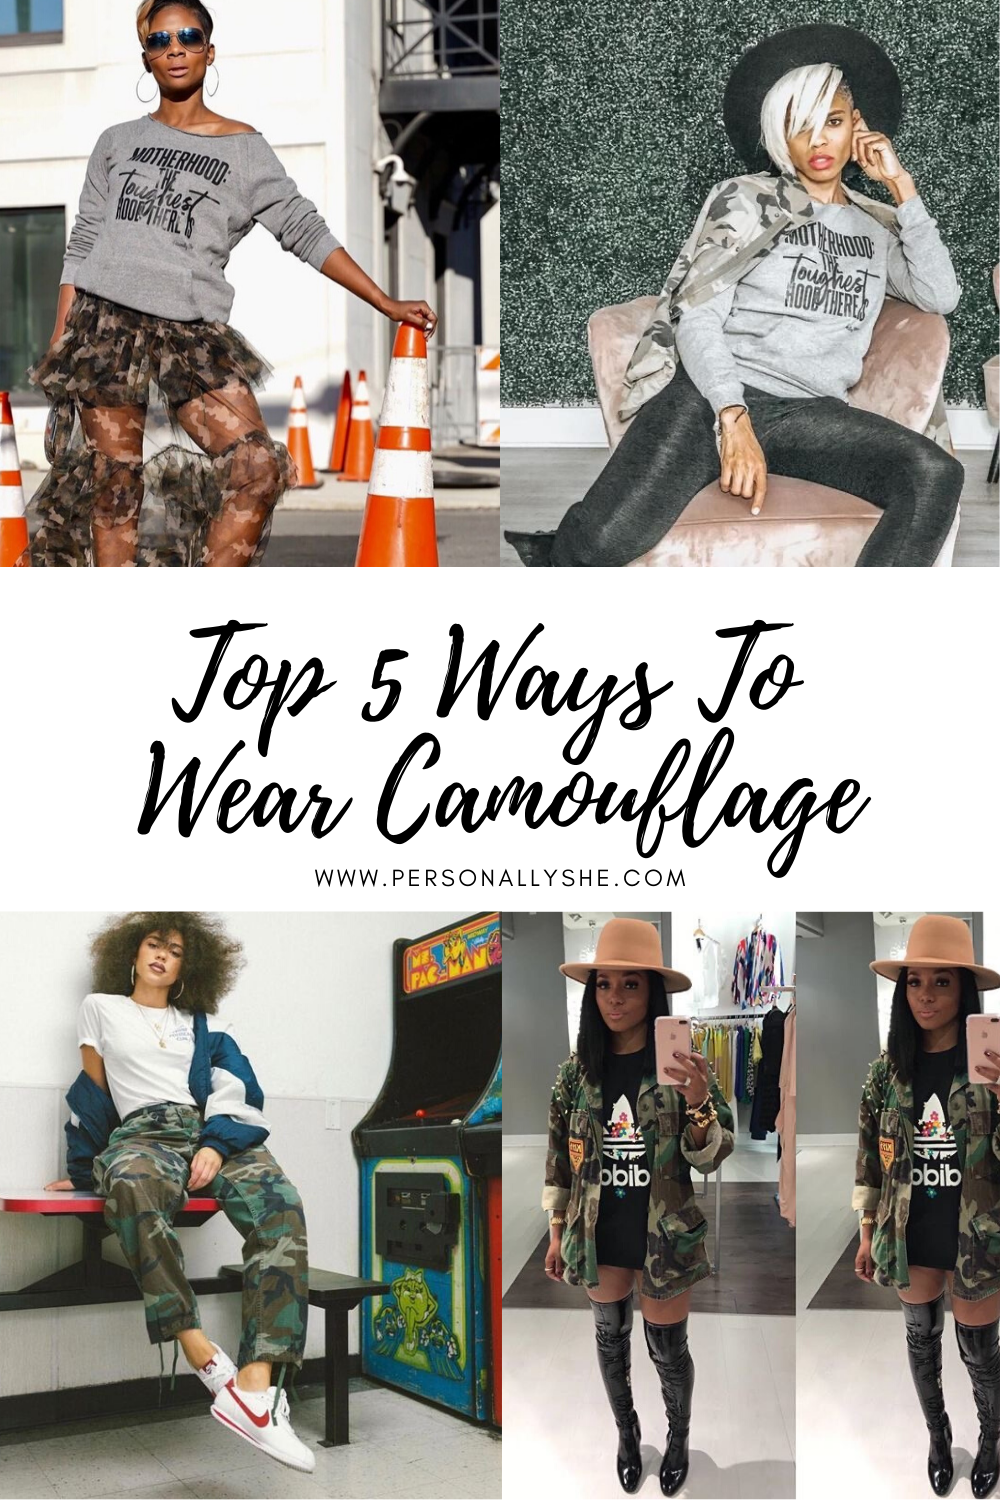 TOP 5 WAYS TO WEAR CAMOUFLAGE @PERSONALLYSHE - Personally She